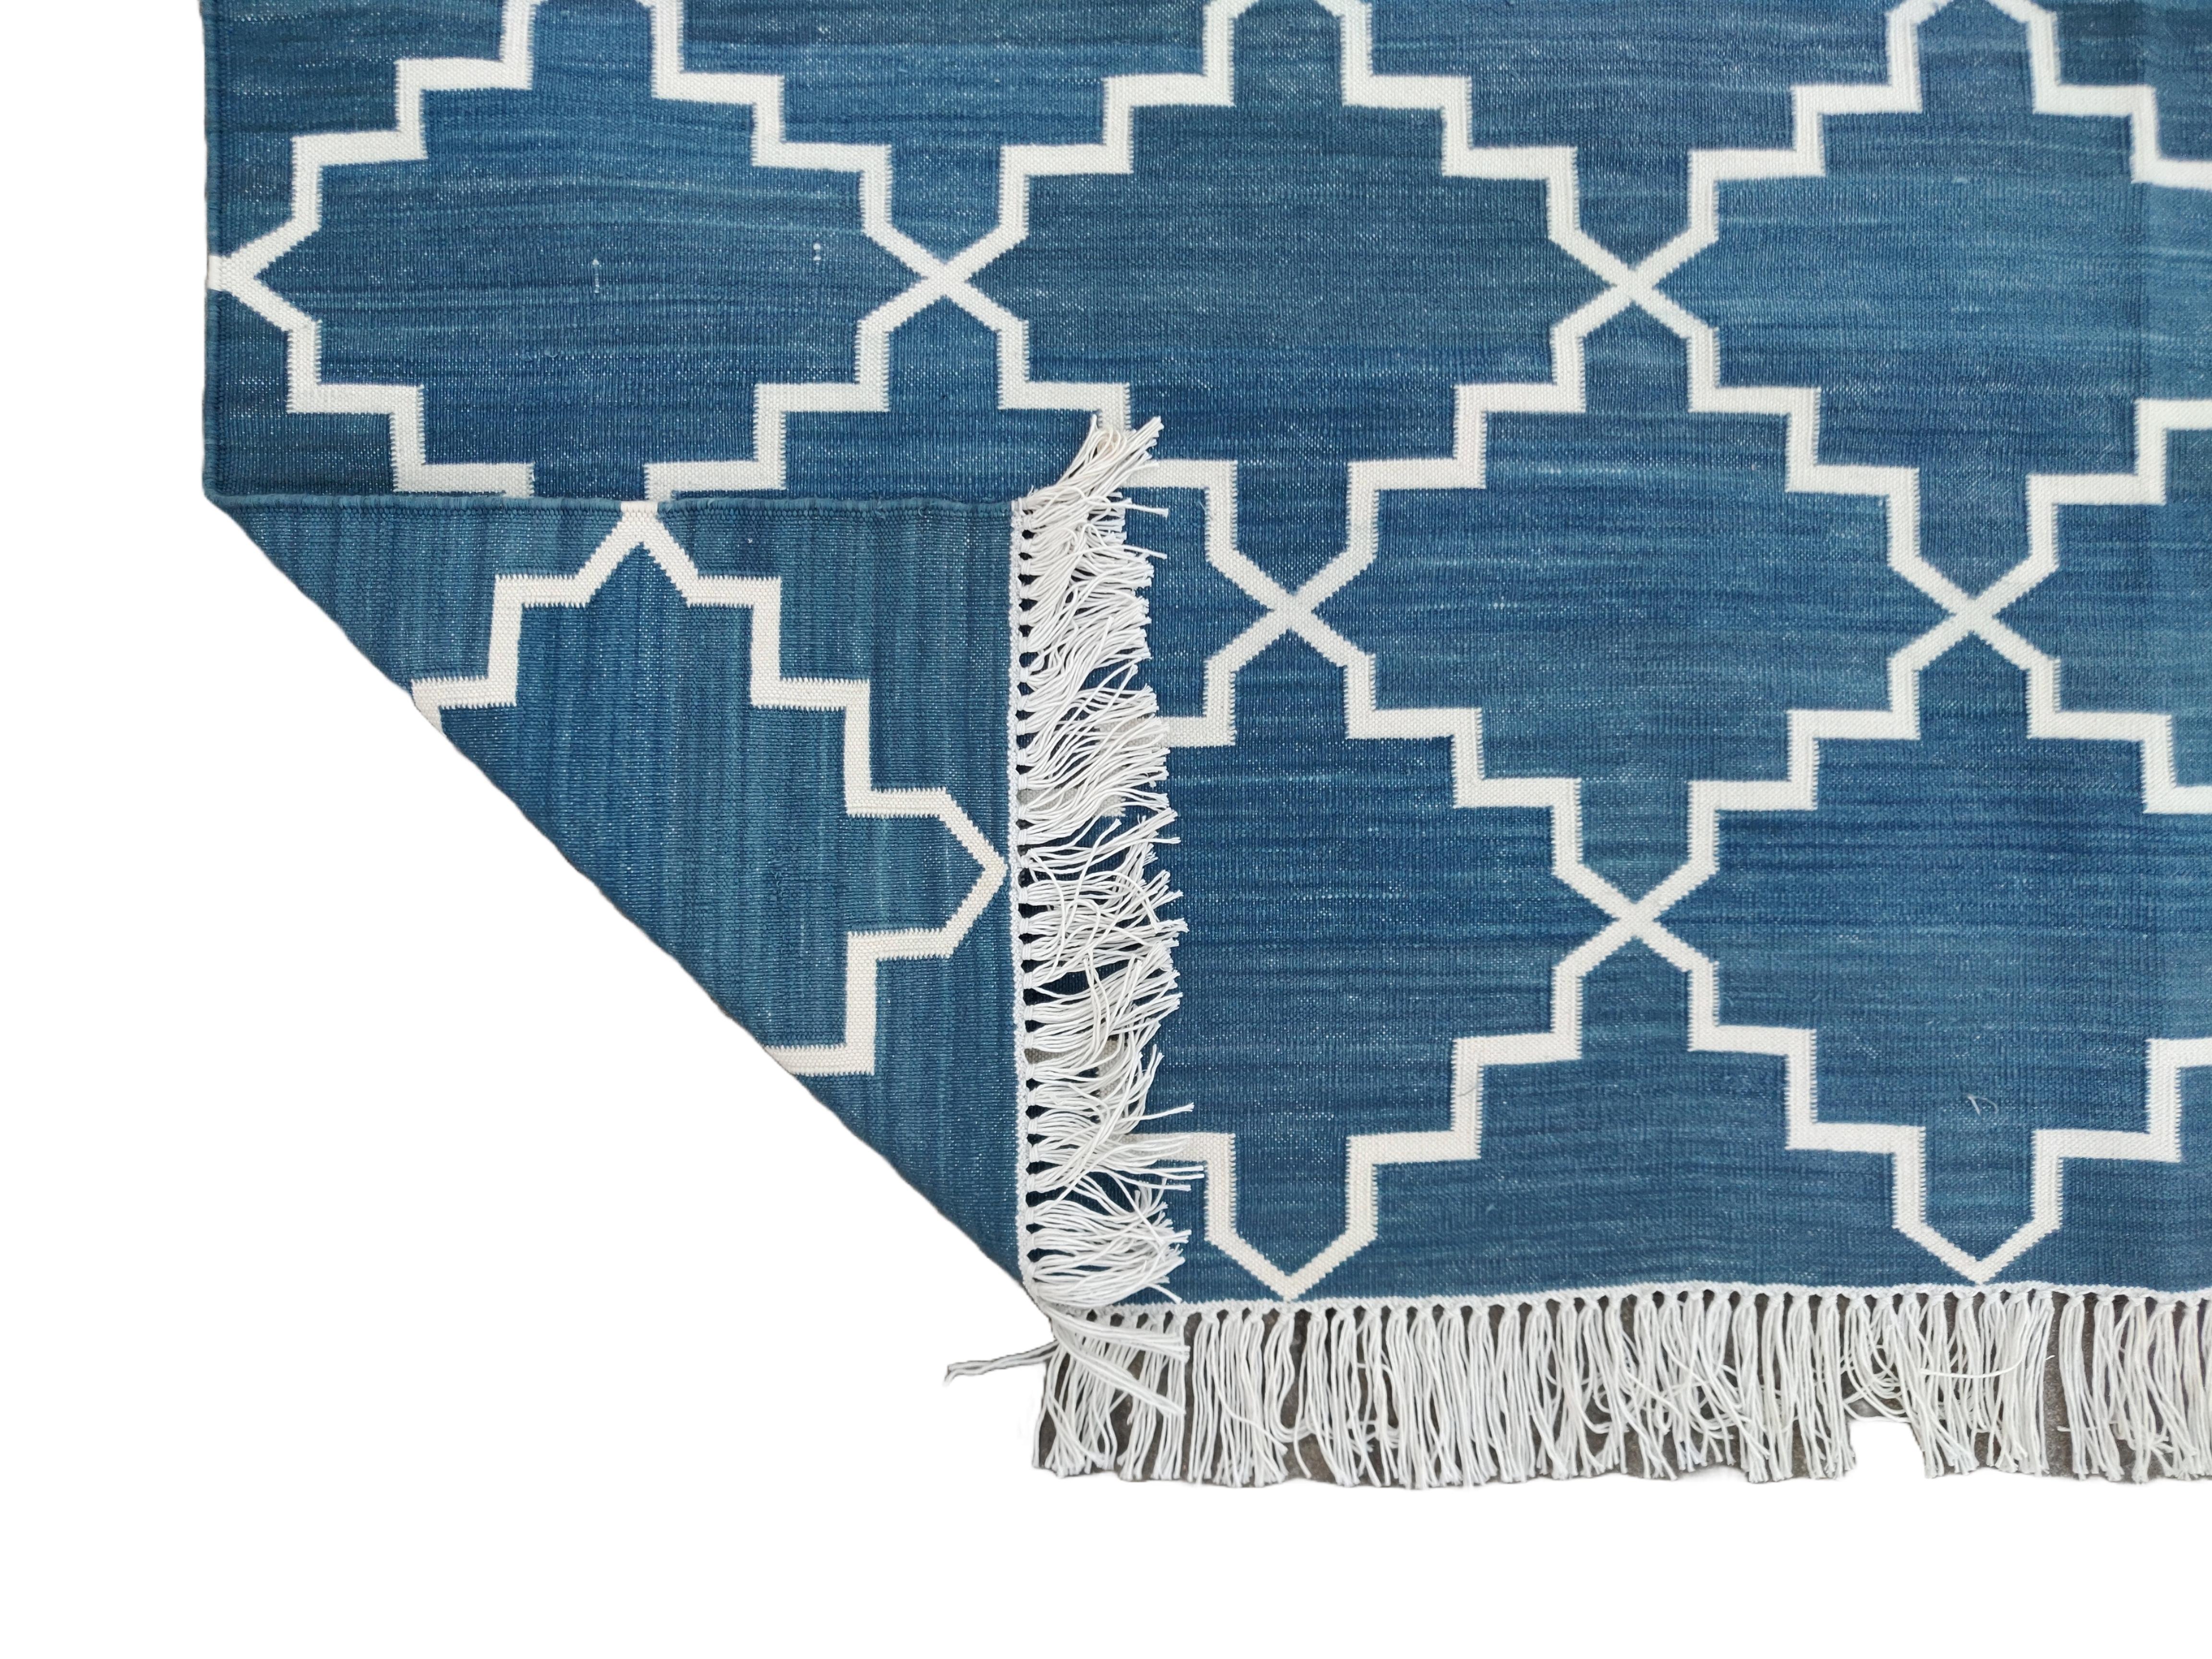 Handmade Cotton Area Flat Weave Rug, Blue And White Geometric Indian Dhurrie Rug For Sale 1